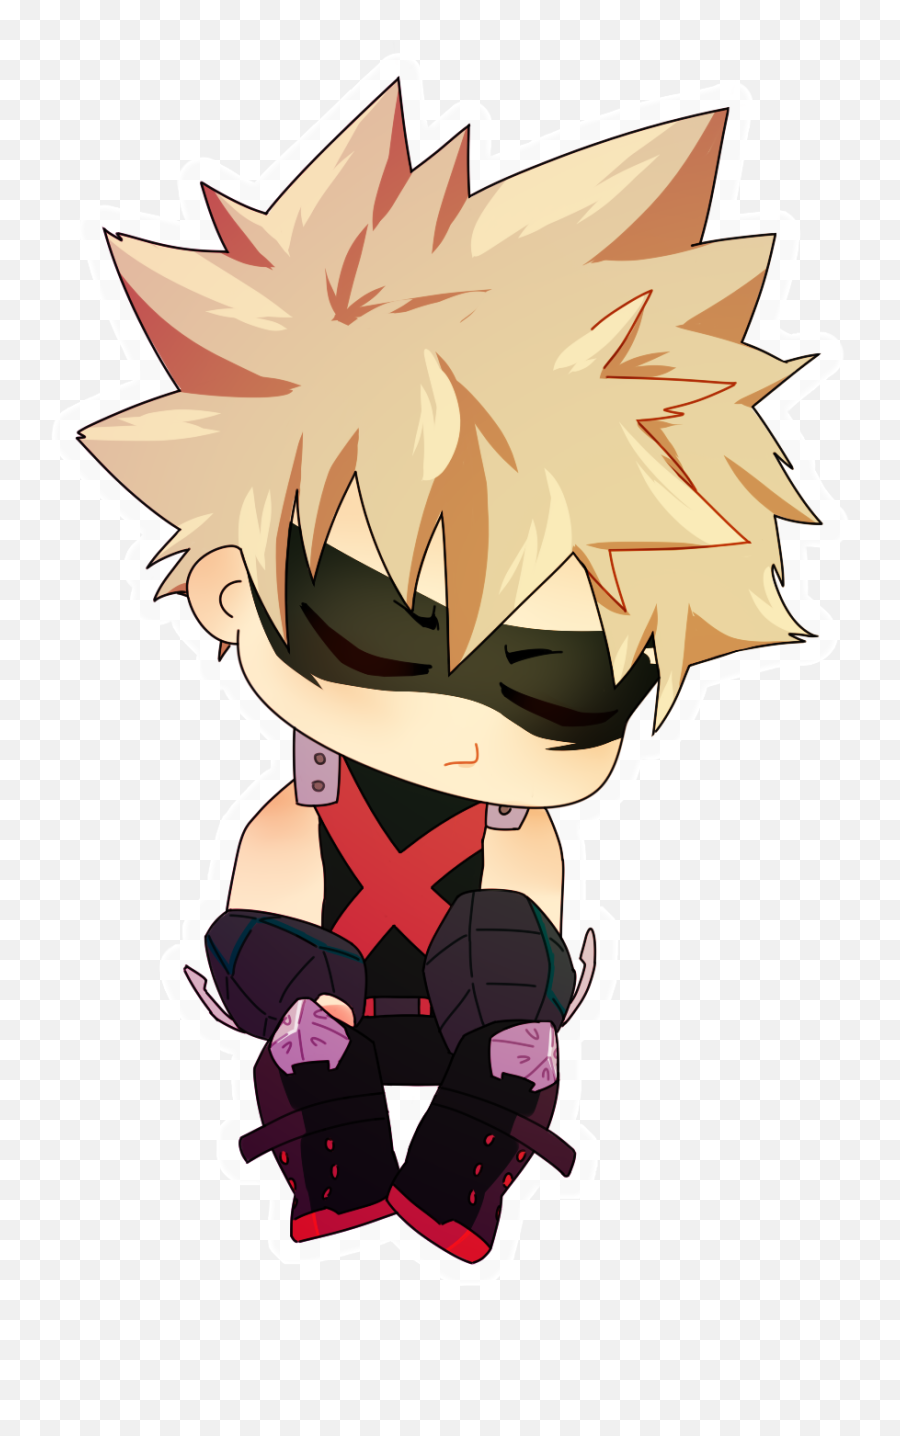 Nox Looking For Work And Commissions - Bakudeku Fanart Cute Png,Bakugo Icon